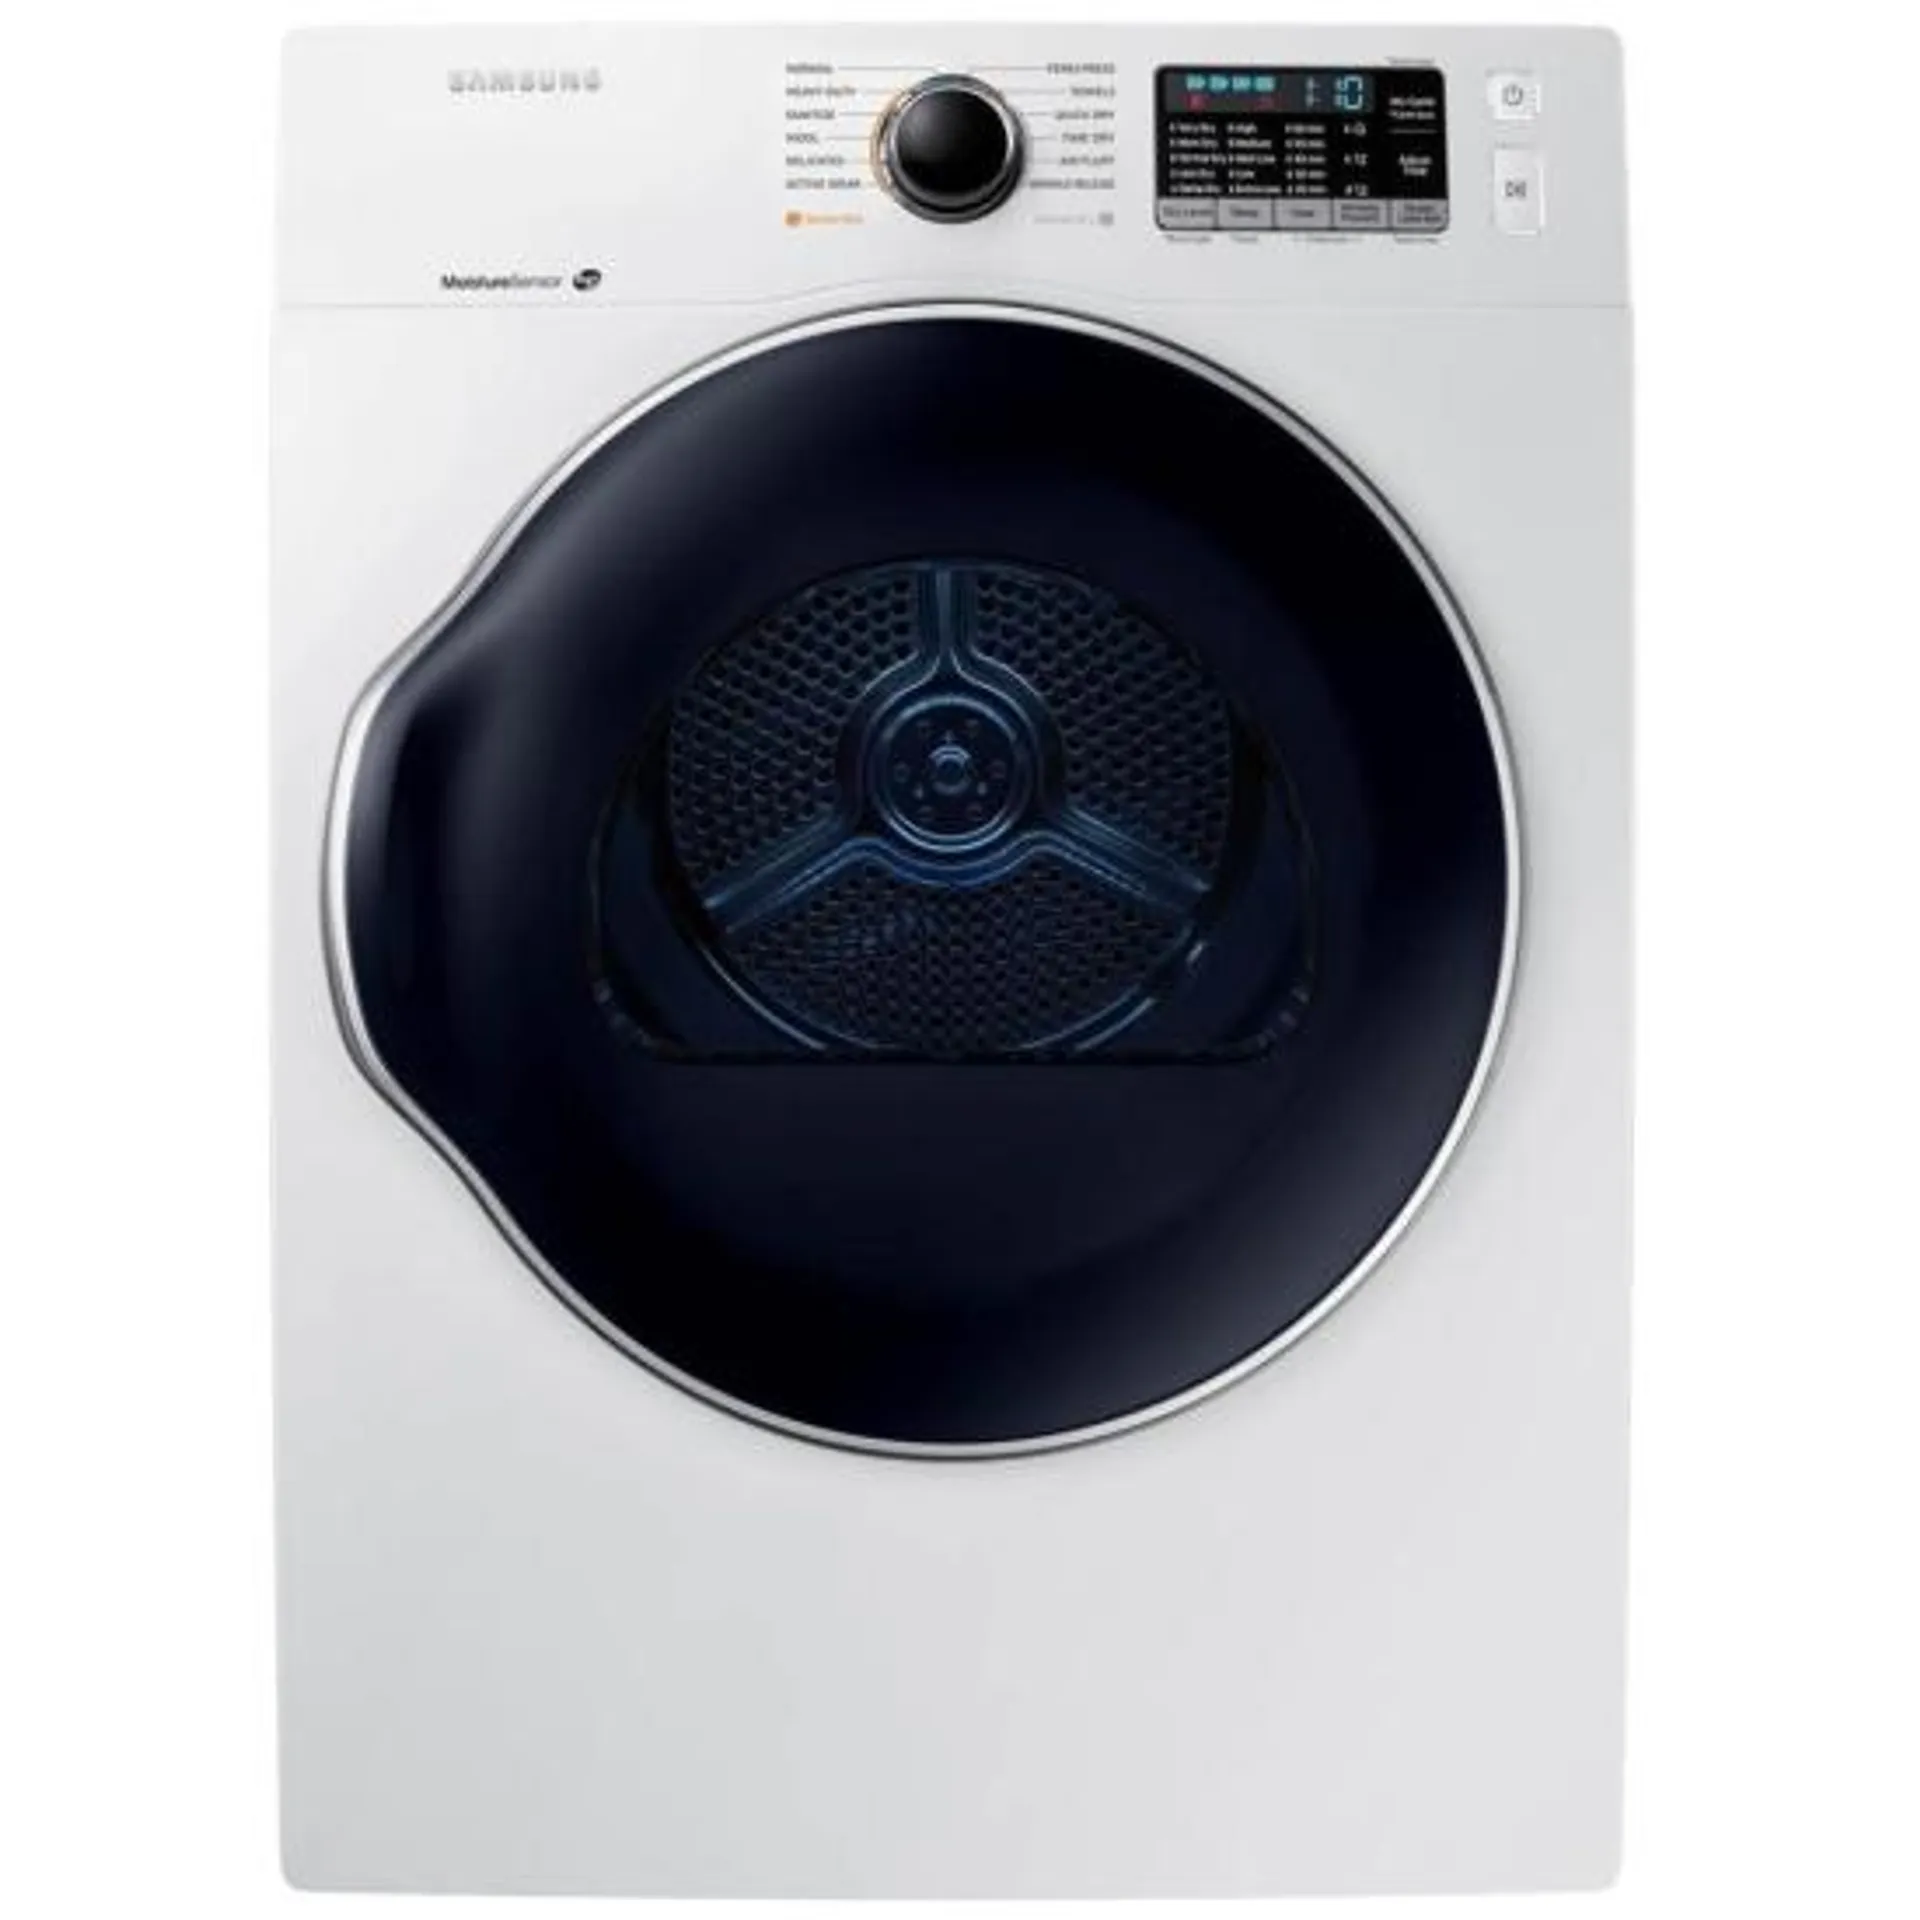 Samsung DV22K6800EW - DV22K6800EW/AC Dryer, 24" Width, Electric Dryer, 4.0 cu. ft. Capacity, 12 Dry Cycles, 5 Temperature Settings, Stackable, Steel Drum, Wifi Enabled, White colour